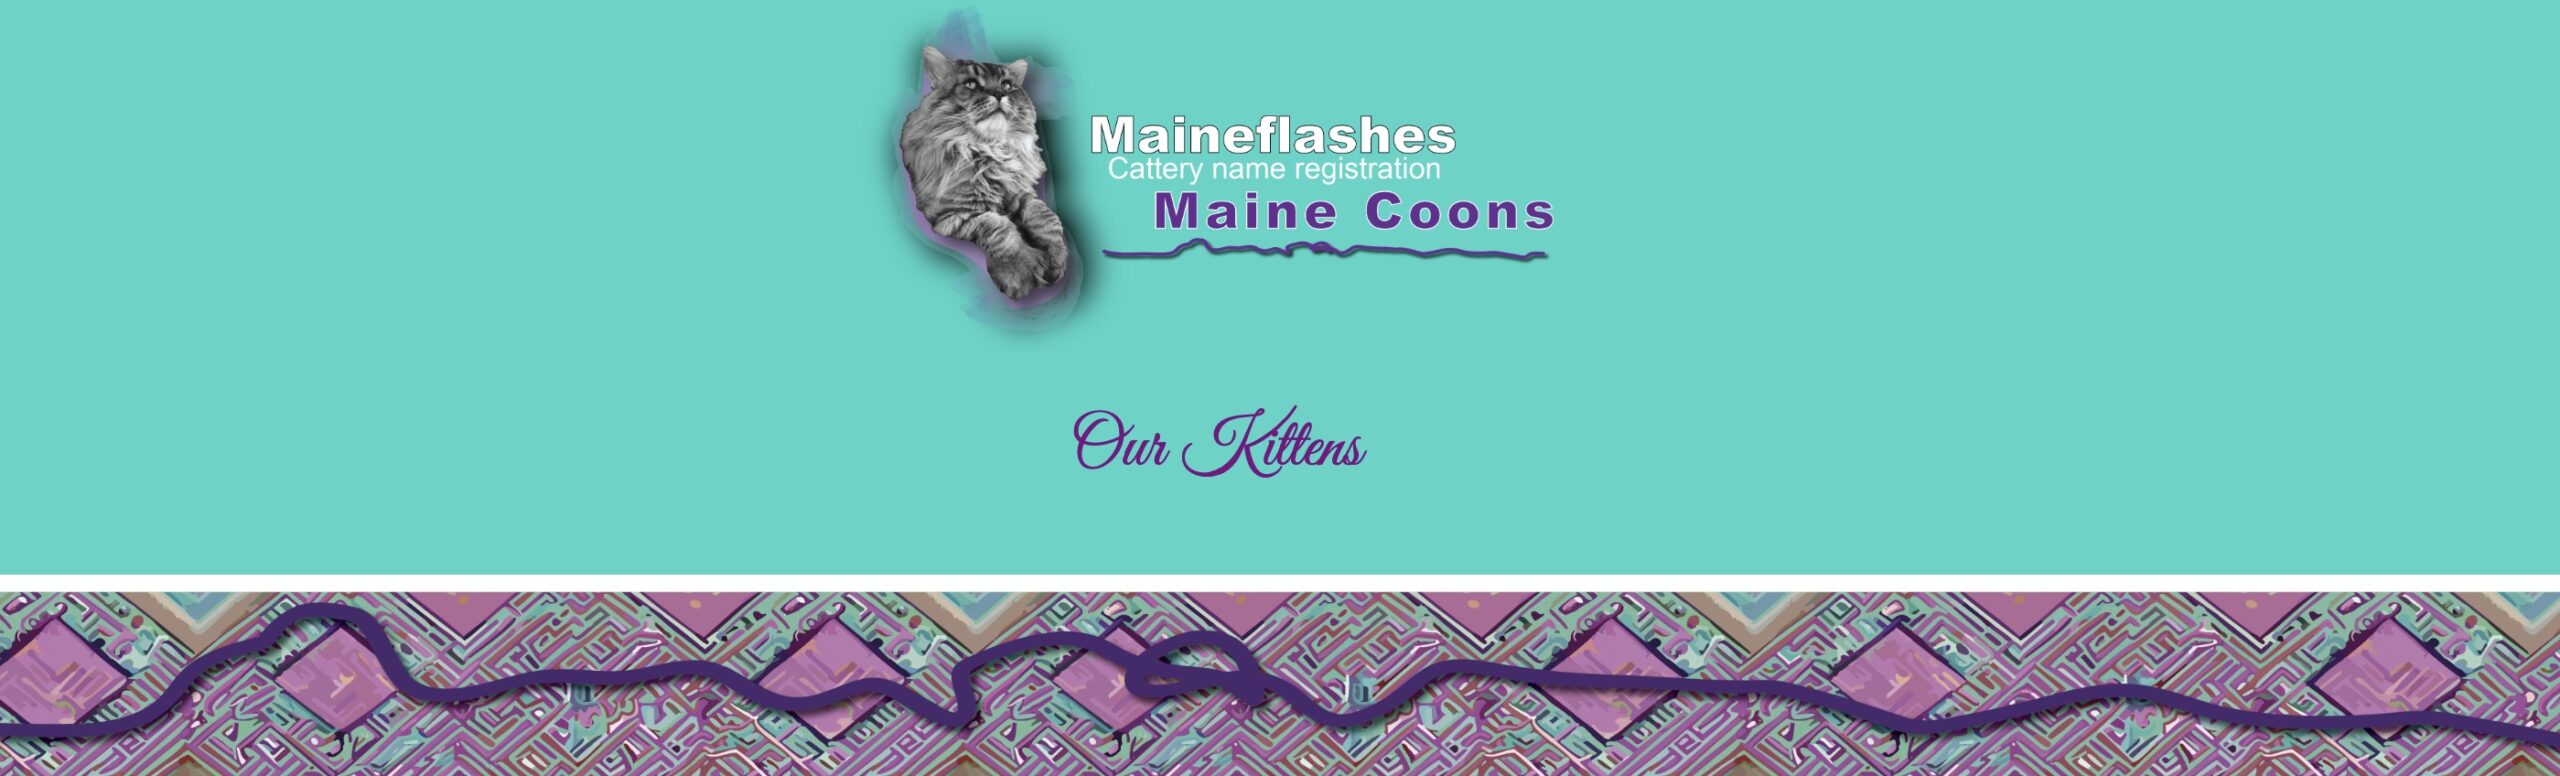 MaineFlashes Maine Coon kittens, maine coon kittens for sale, Texas maine coon kttens for sale